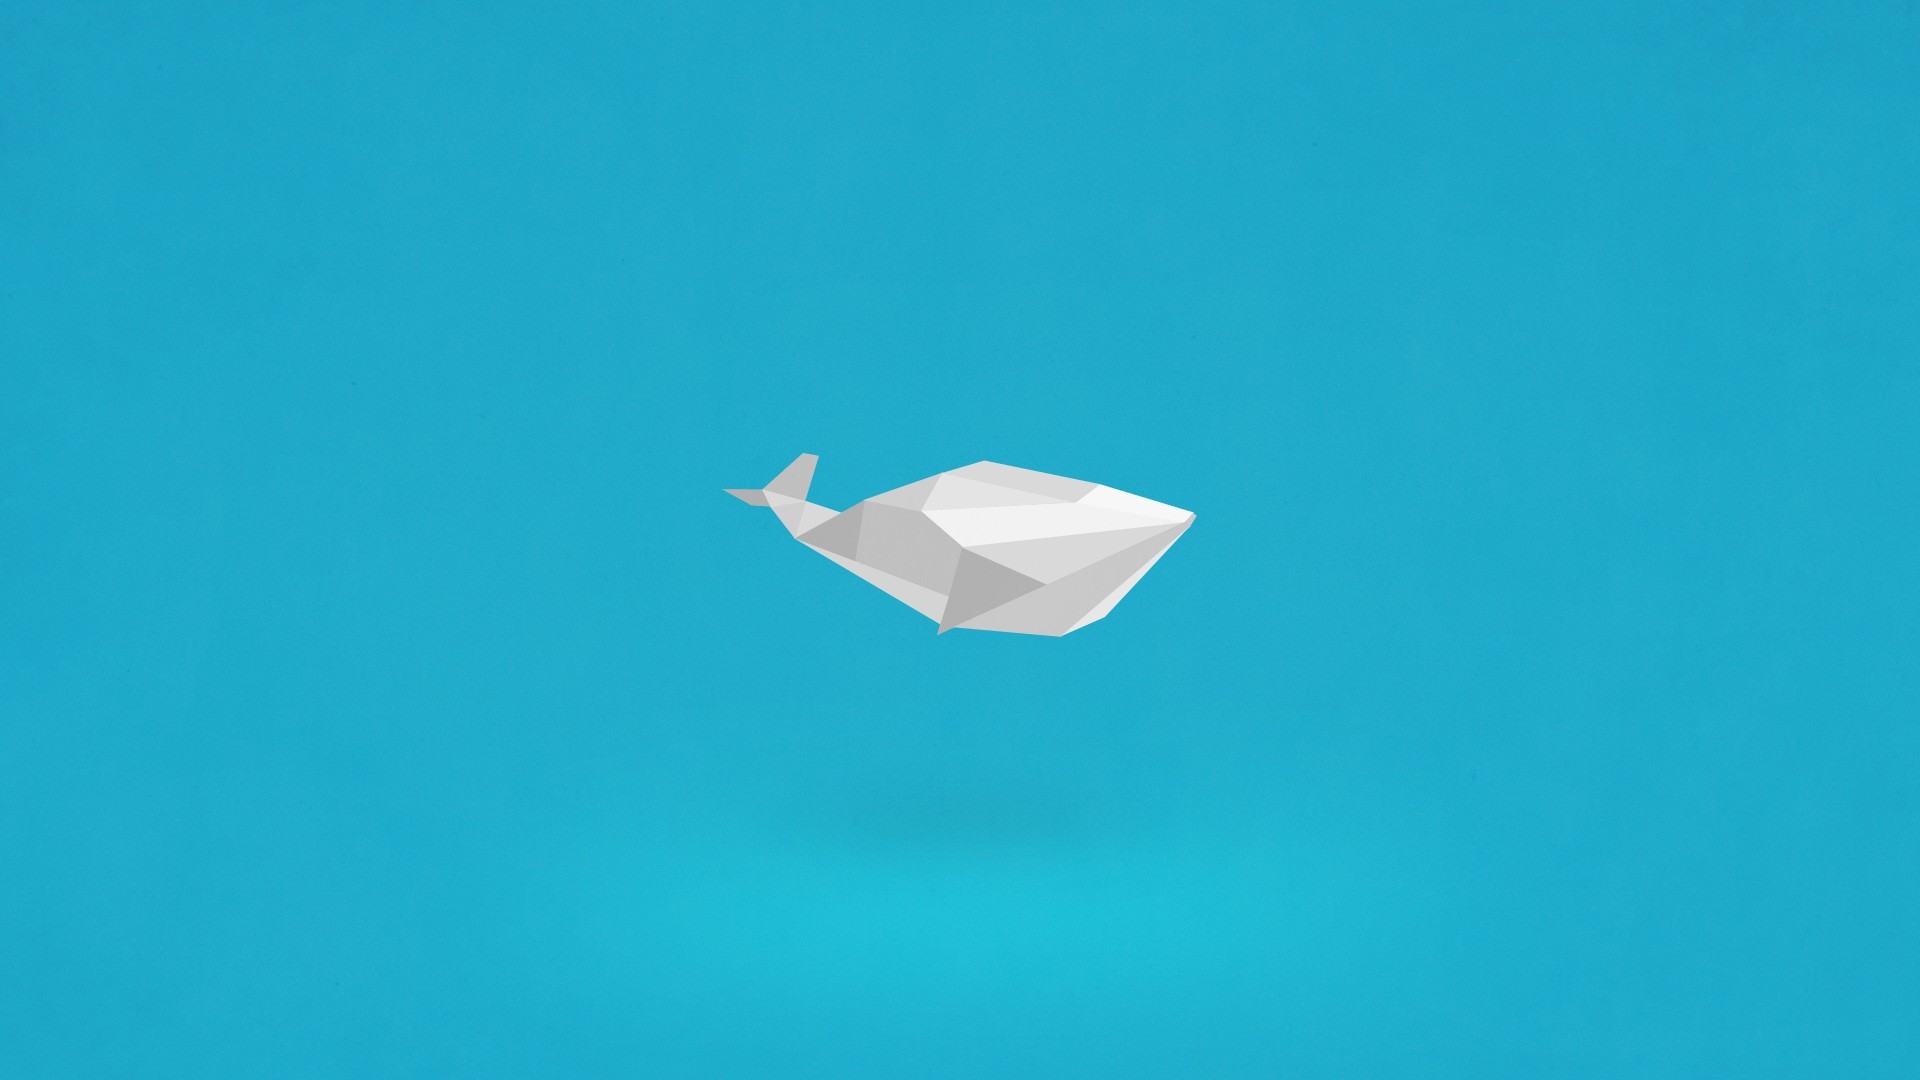 Minimalist Whale Wallpapers